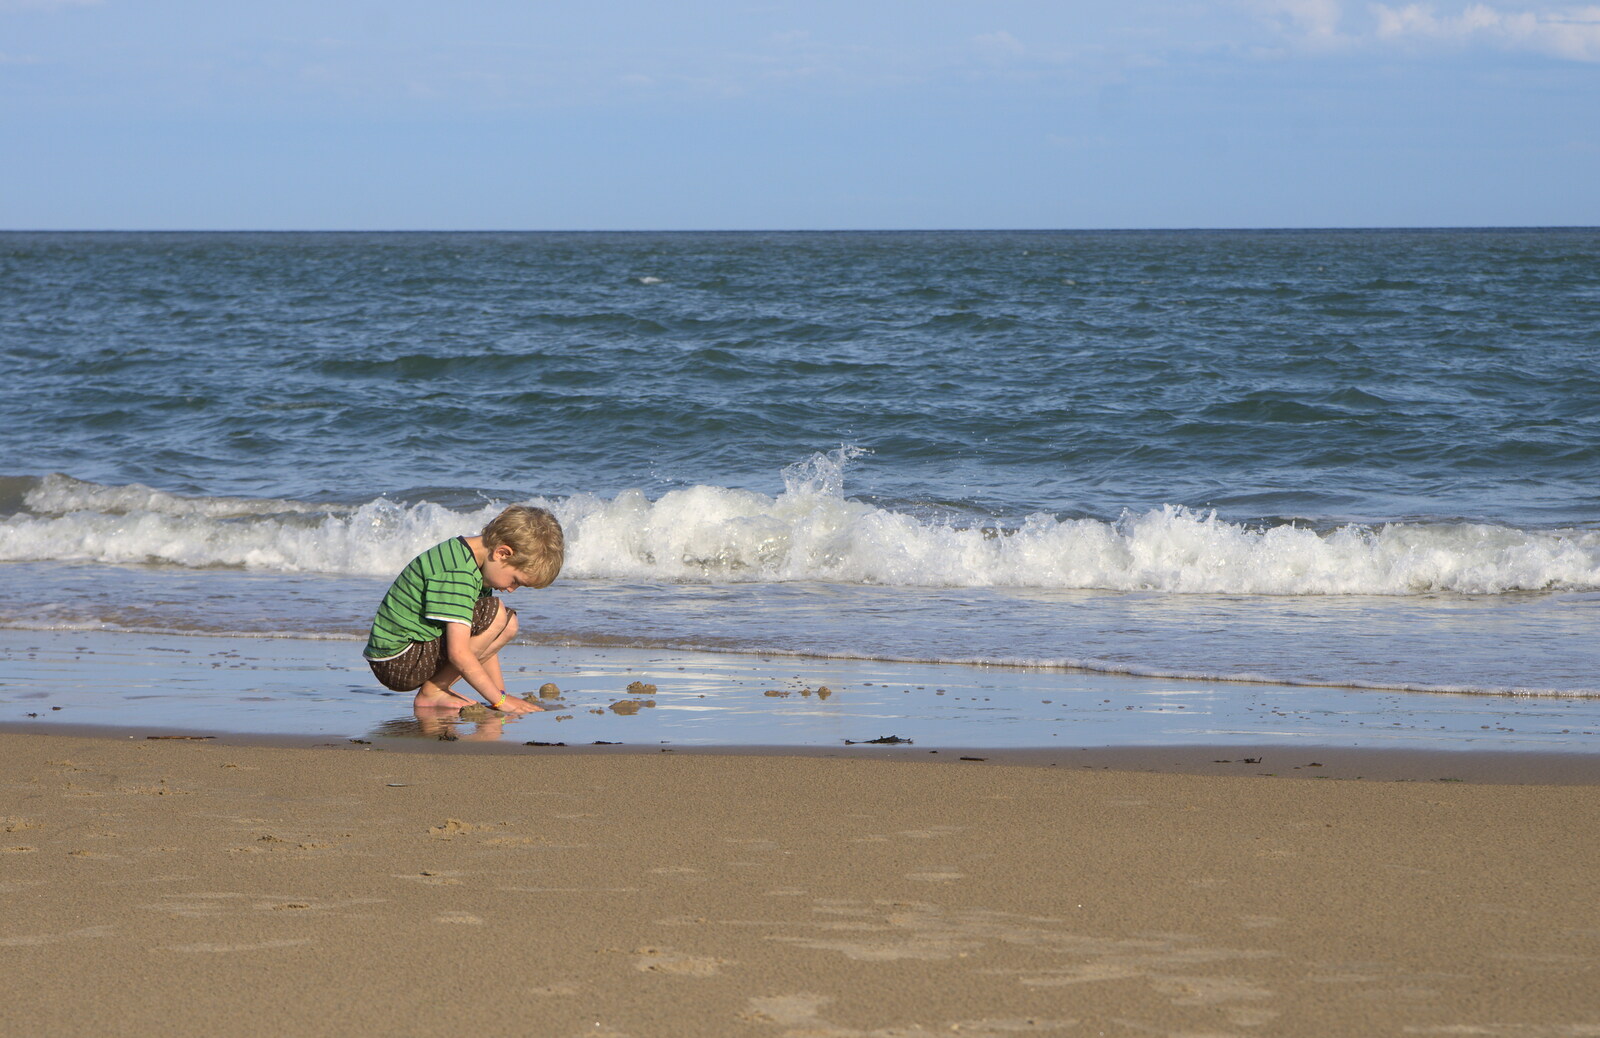 Fred pokes about in the sand from Camping at Silver Strand, Wicklow, County Wicklow, Ireland - 7th August 2014